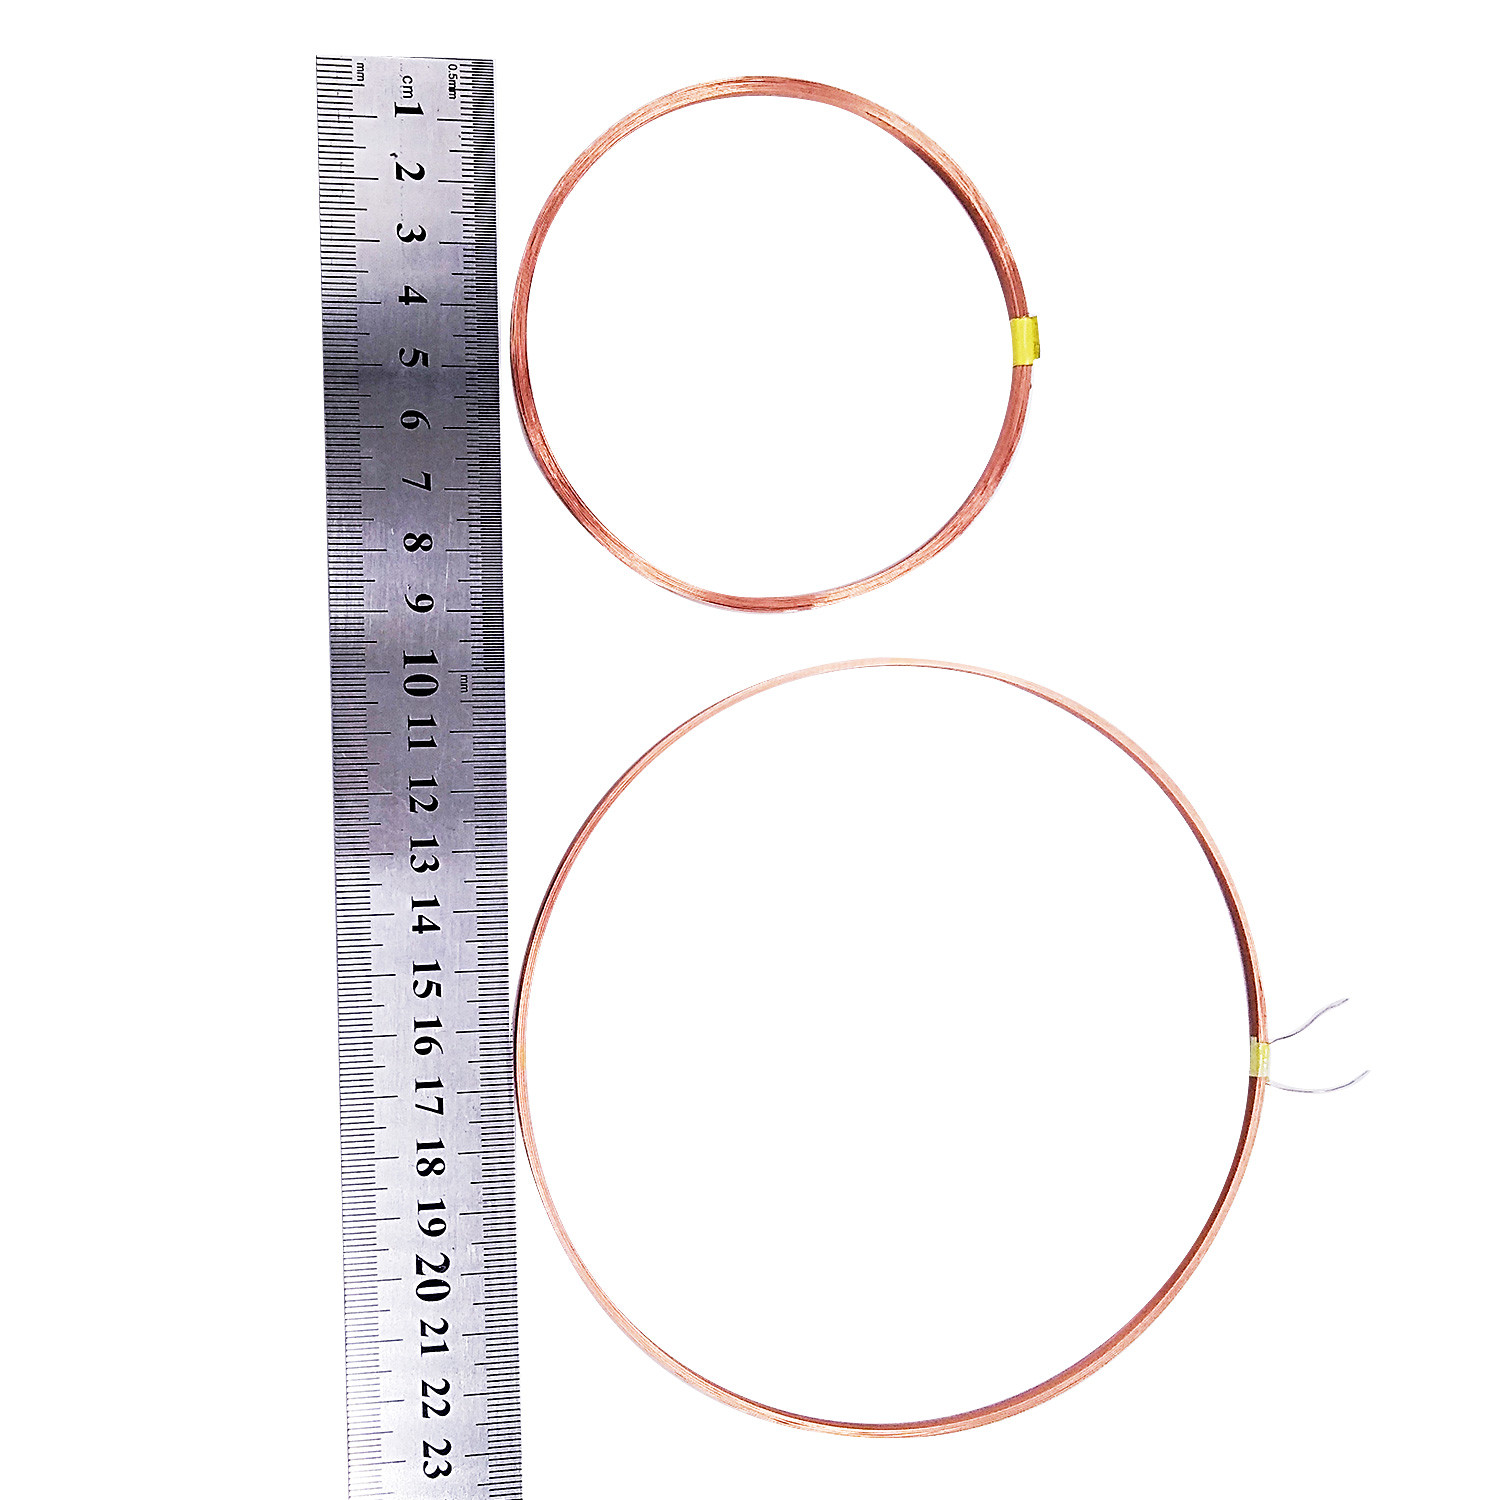 Buy RFID 125kHz Coil (90mm out diameter RFID coil) at wholesale prices